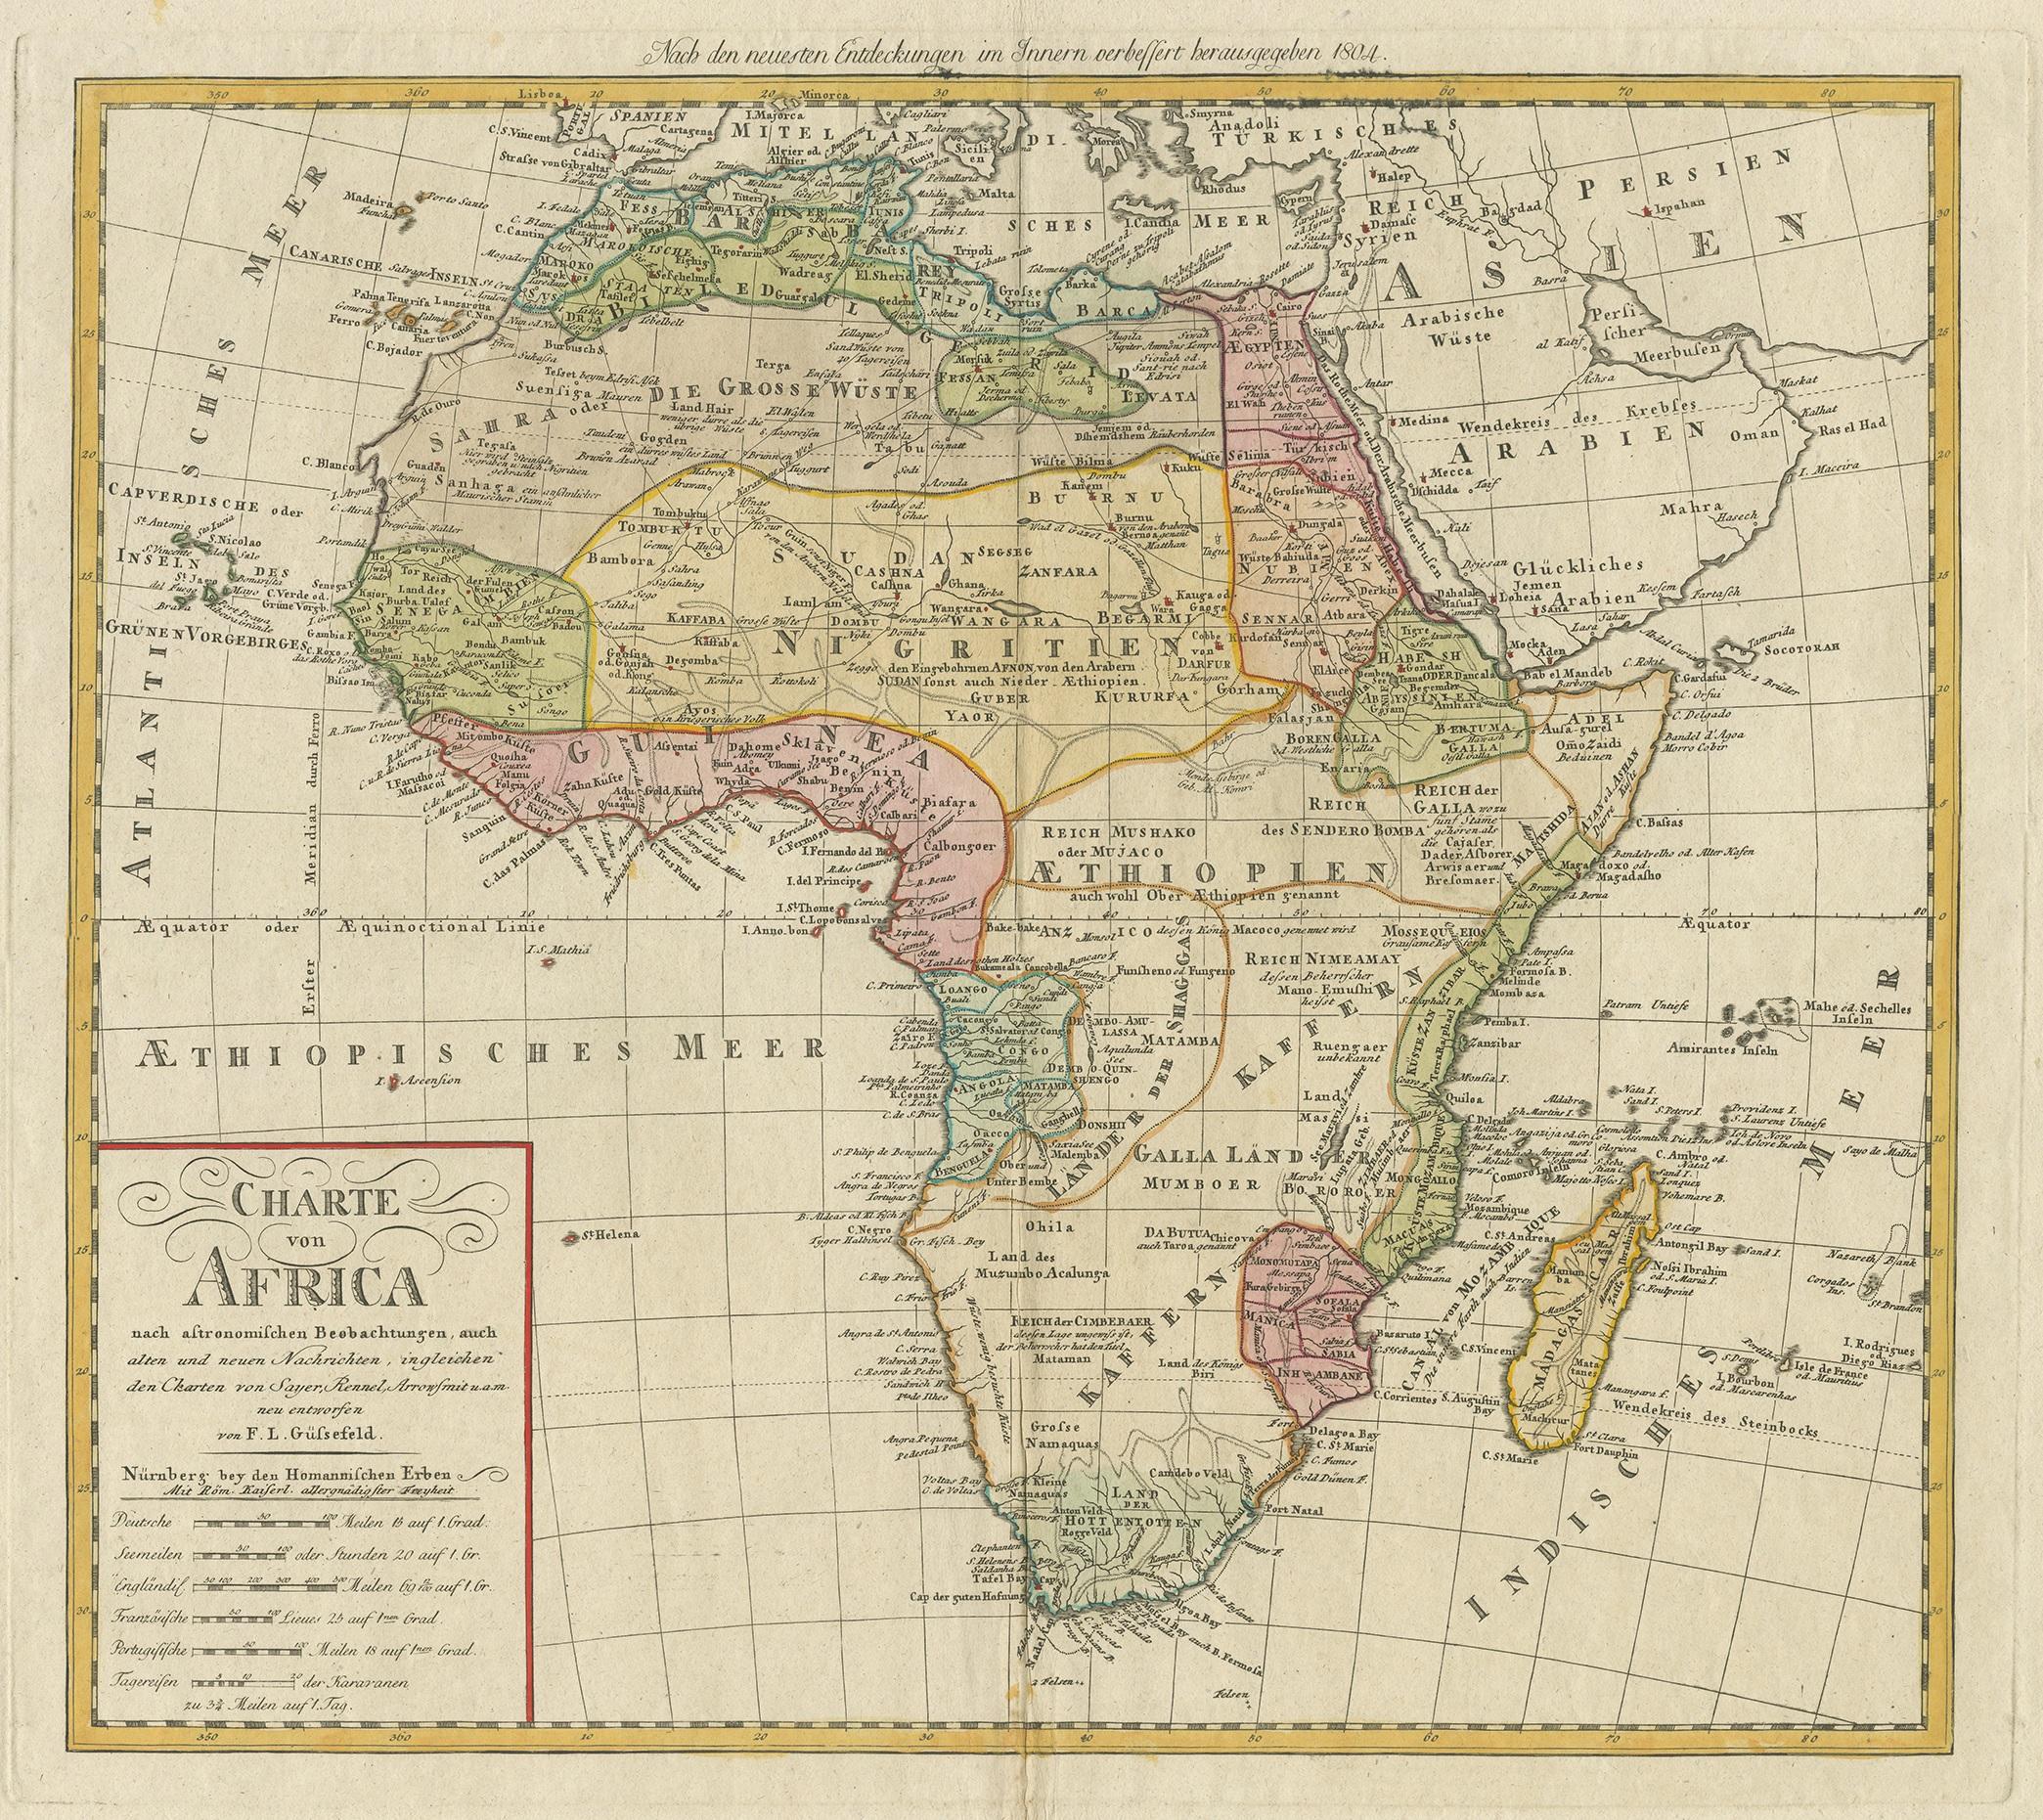 Antique map titled 'Charte von Africa'. Large, original antique map of Africa by Franz Ludwig Güssefeld. Published by Homann Heirs, 1804.